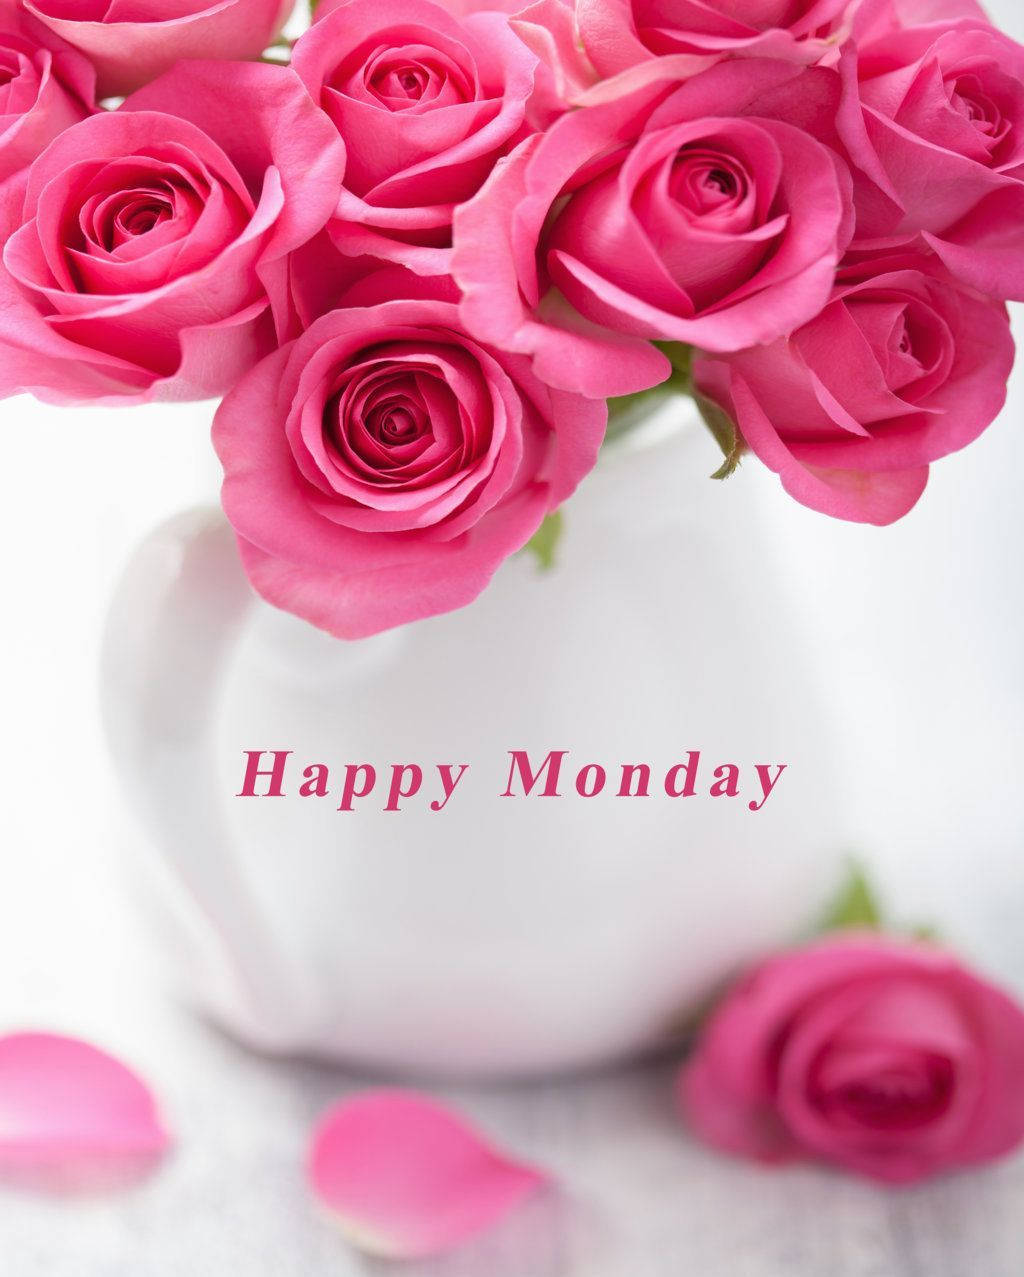 Bloom Towards A Lush Week With Monday Roses Background